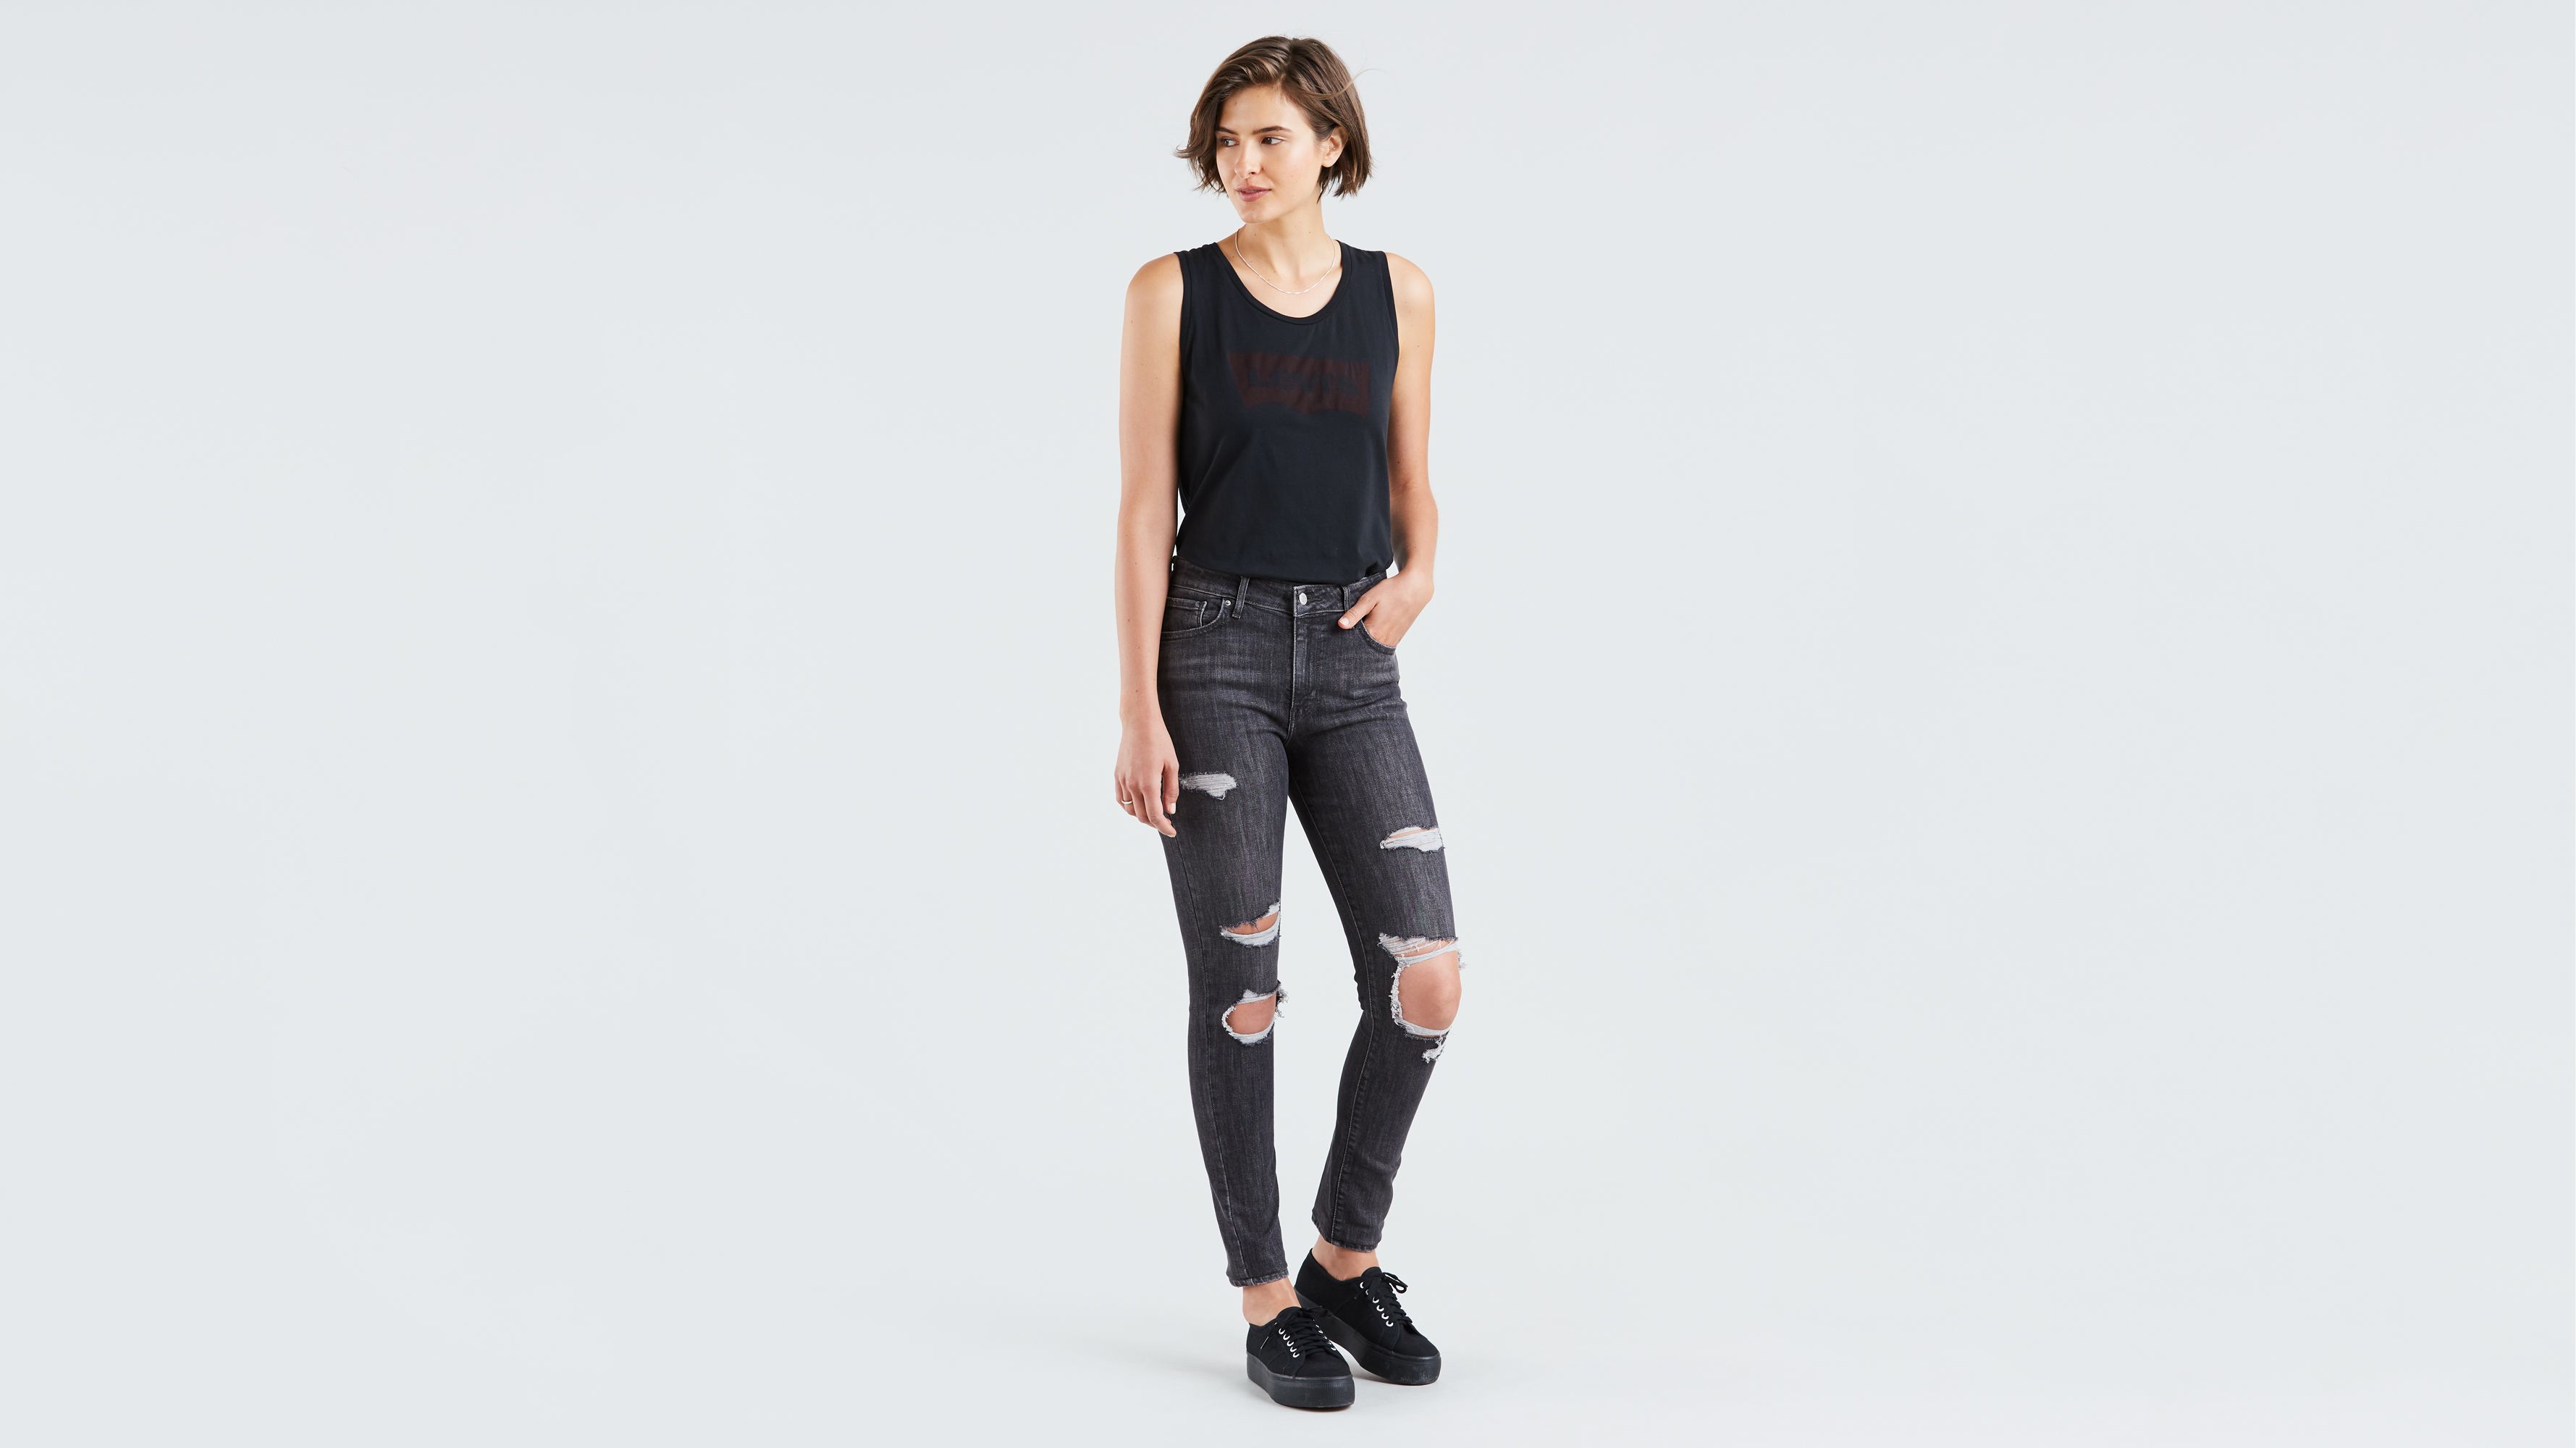 levi's grey ripped jeans